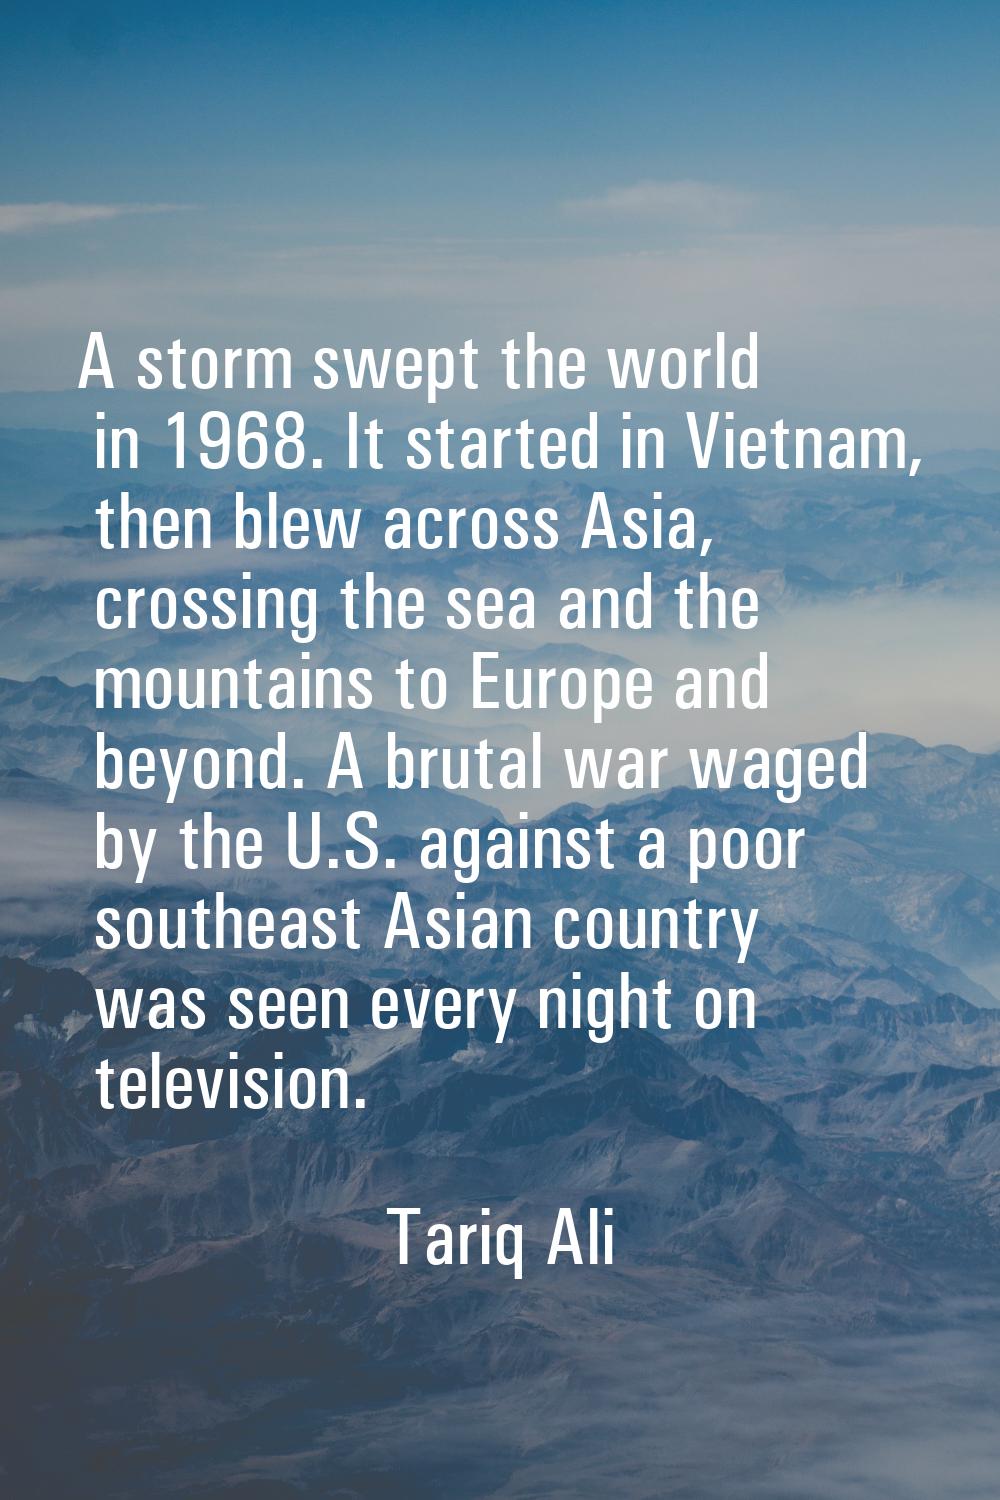 A storm swept the world in 1968. It started in Vietnam, then blew across Asia, crossing the sea and